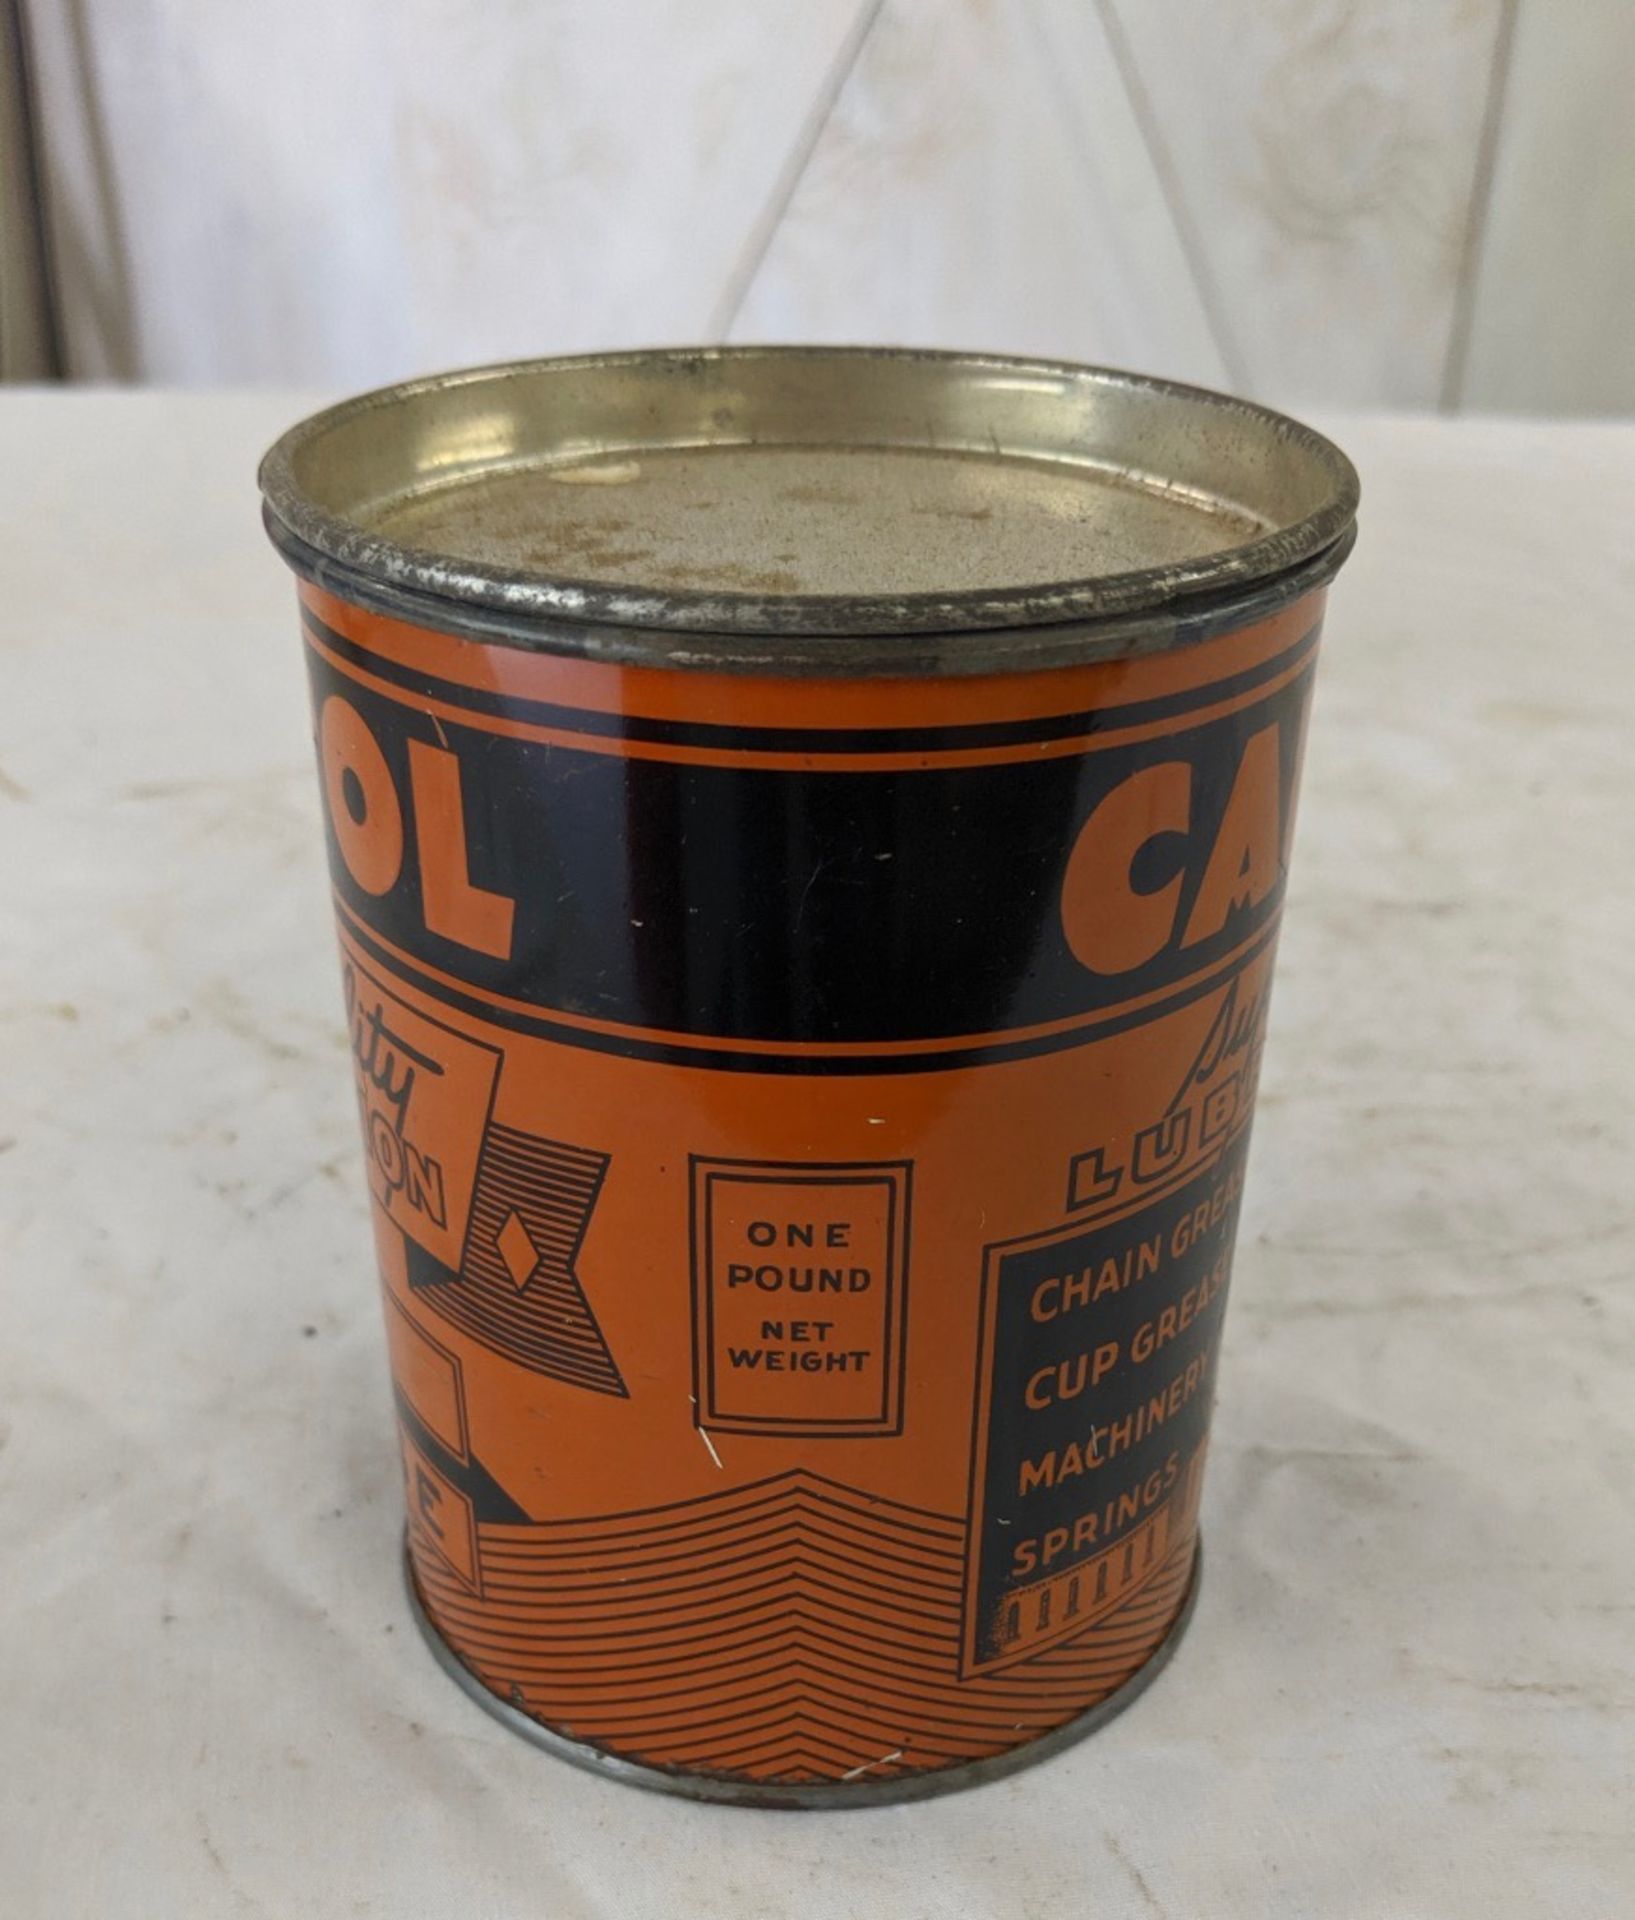 Capital Super Quality Lubrication Grease - 1 Pound Can - Image 4 of 4